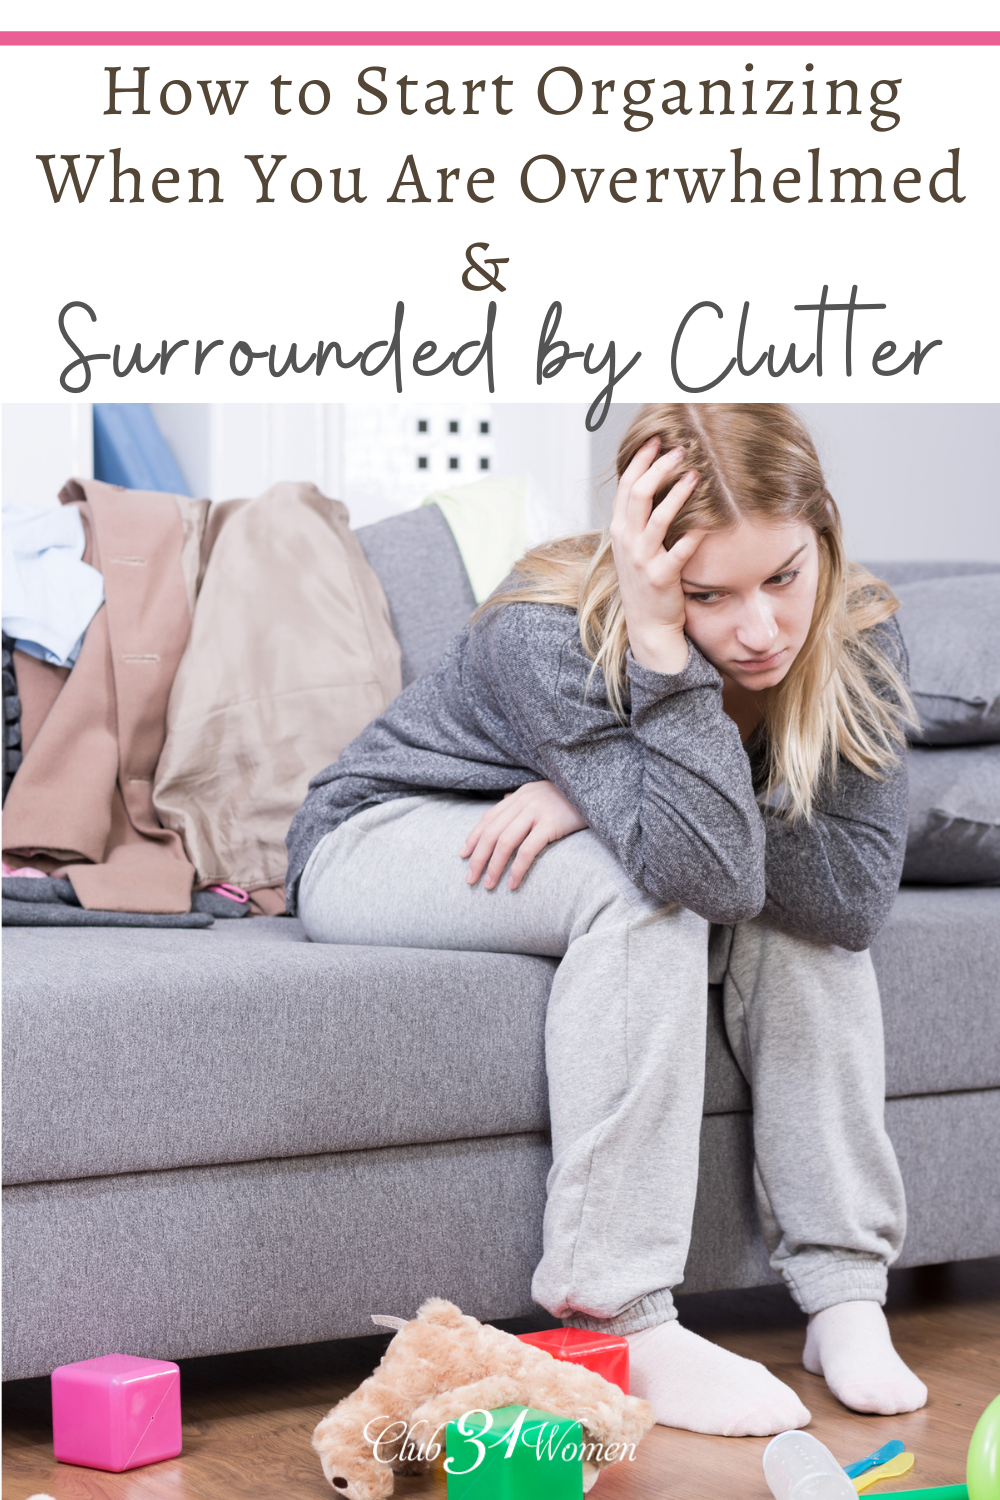 Organizing can be so overwhelming! But there are some ways to help you get started when you're surrounded by clutter and chaos. via @Club31Women